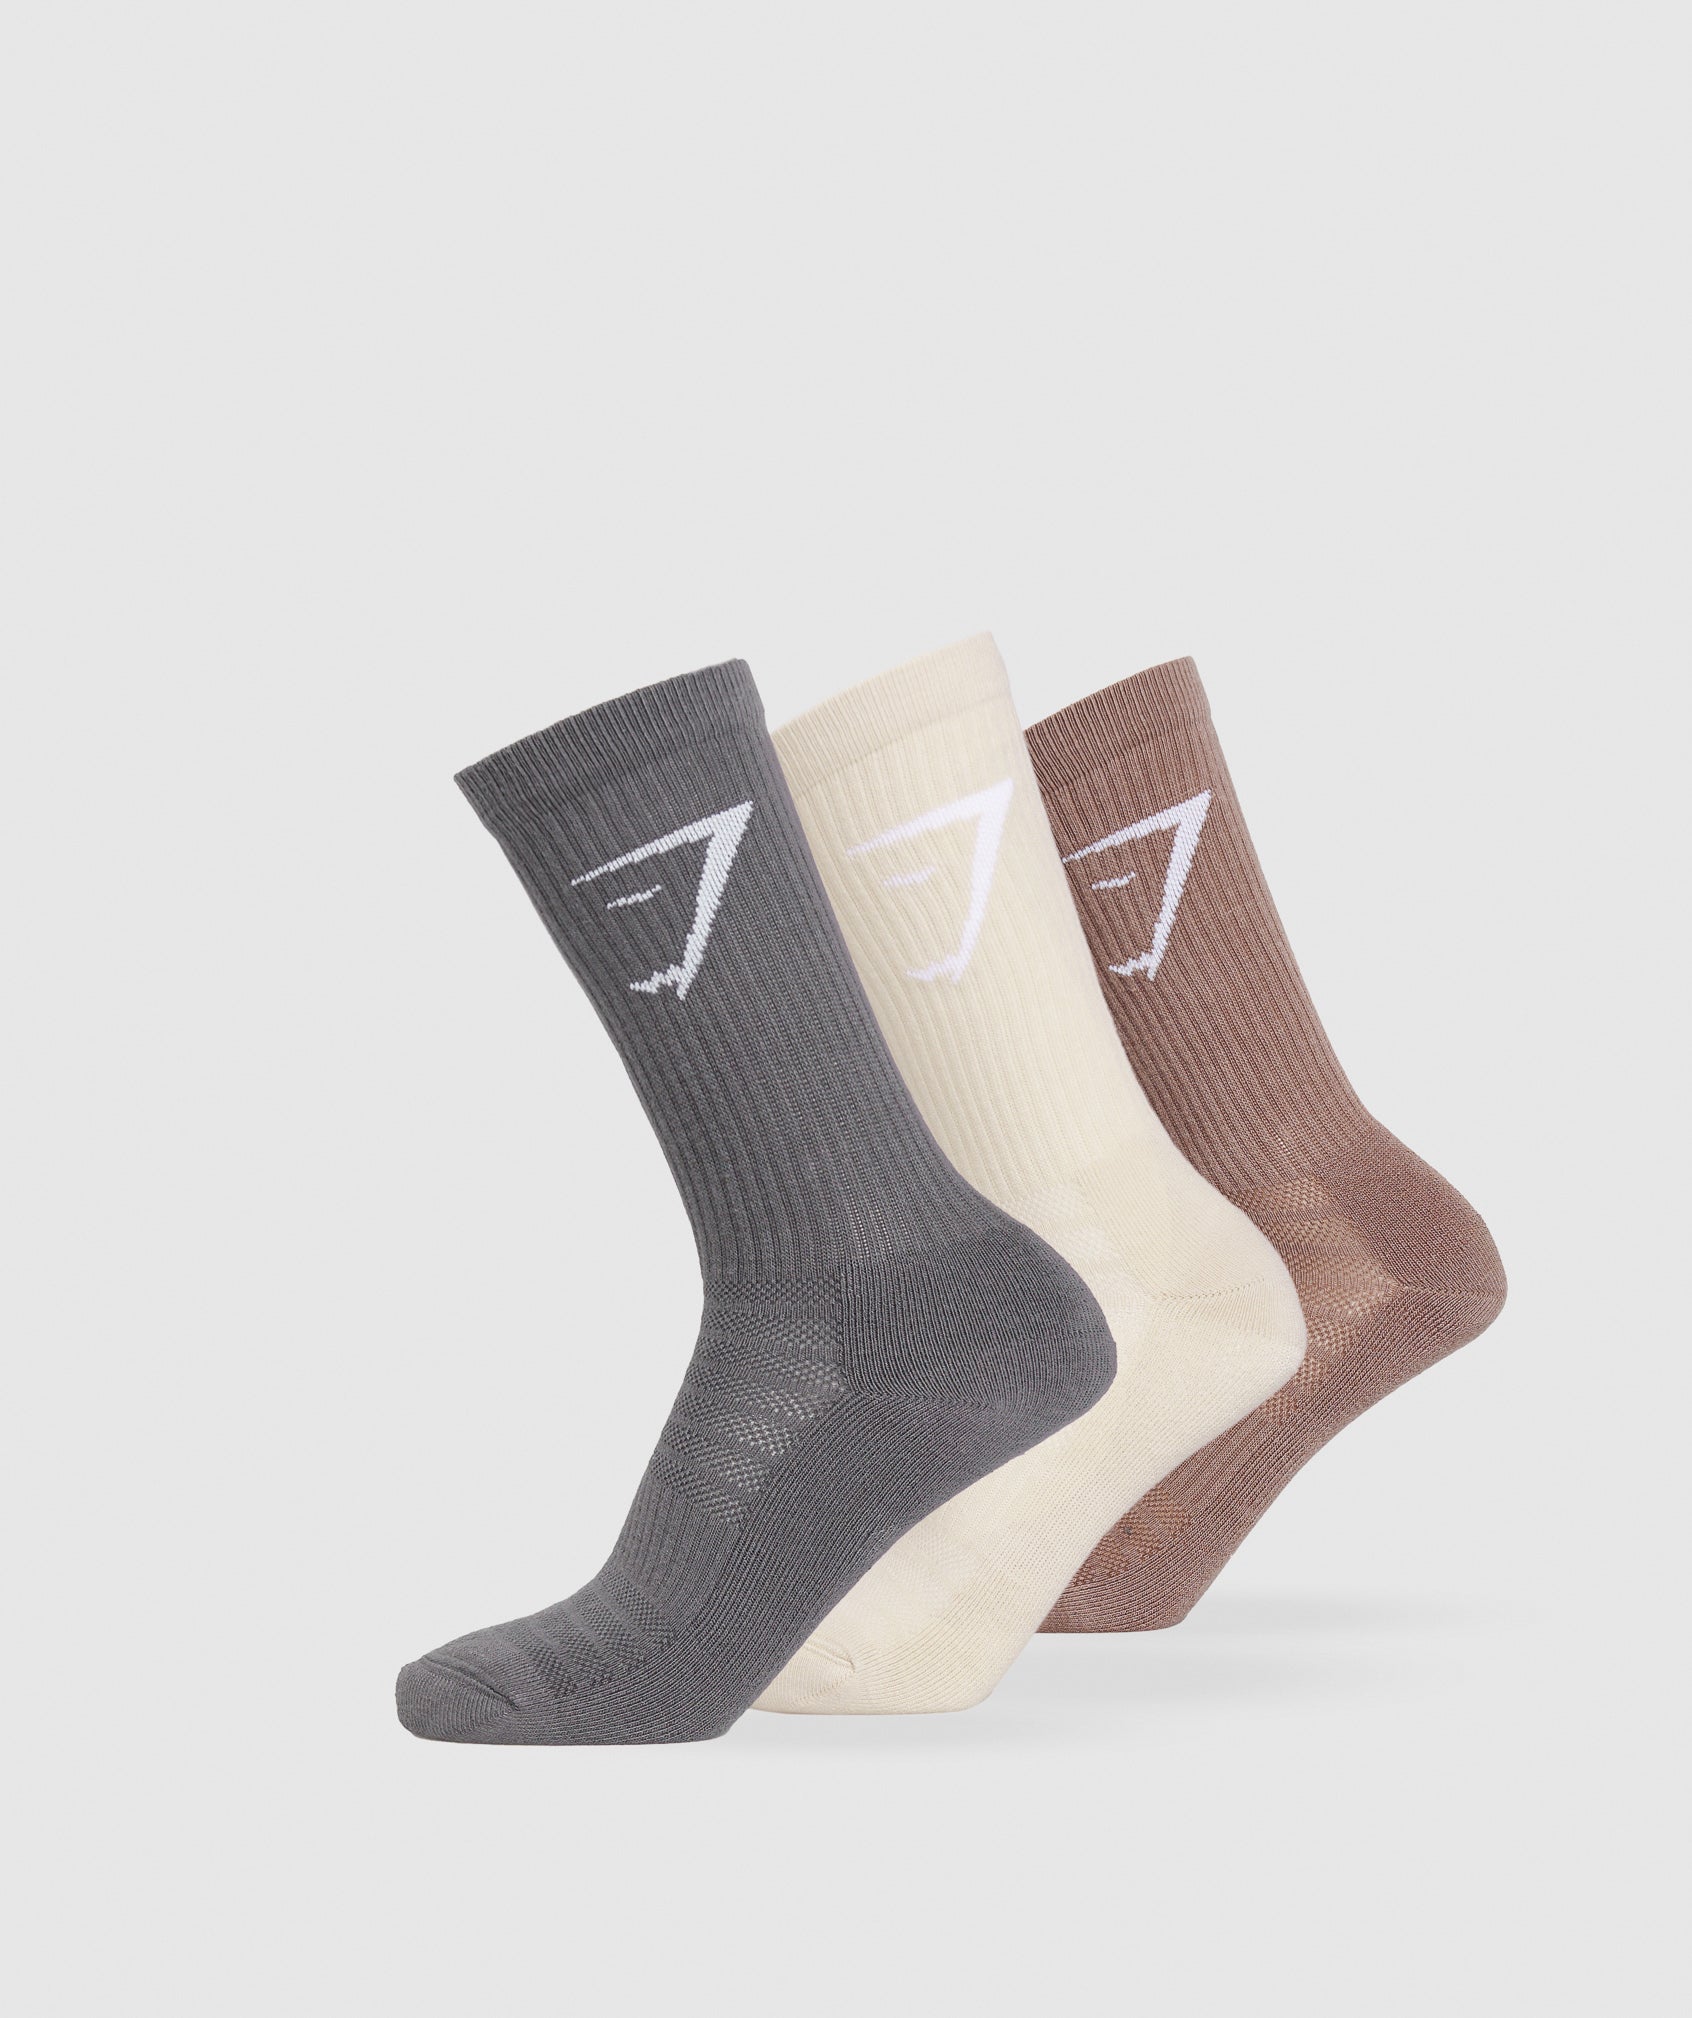 Crew Socks 3pk in Ecru White/Mocha Mauve/Brushed Grey is out of stock